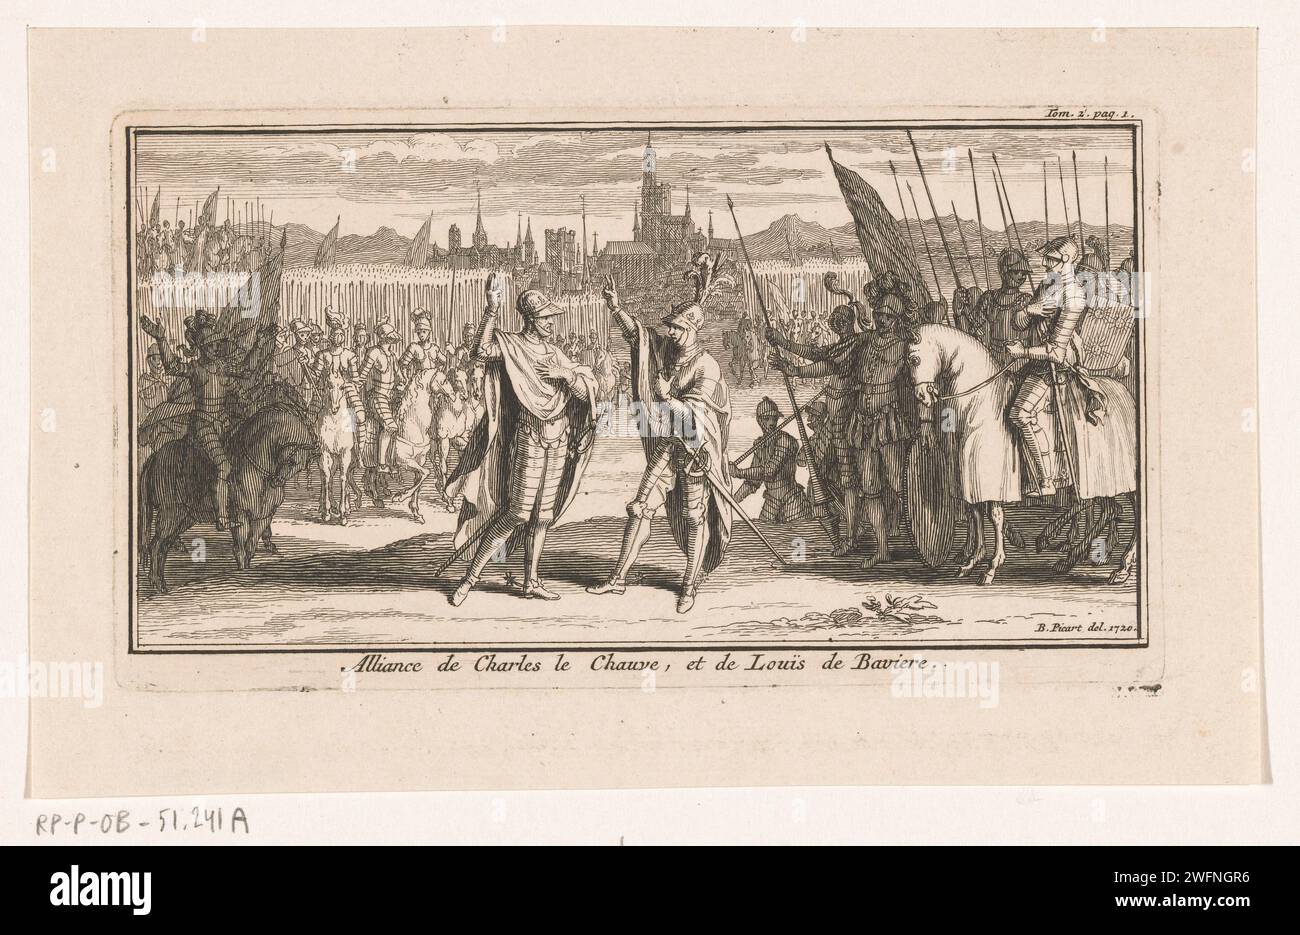 Convention between Charles II de Kale and Lodewijk II de German, Bernard Picart (workshop or), After Bernard Picart, 1720 print Charles II de Kale and Louis II The German concludes the Treaty of Meerssen, on 8 August 870 on the battlefield. They are accompanied by their armies who are placed behind them. In the background a face on the city. At the top right marked: Tom. 2 p. 1. Amsterdam paper etching / engraving alliance, league, union, foedus. land forces. church (exterior) Stock Photo